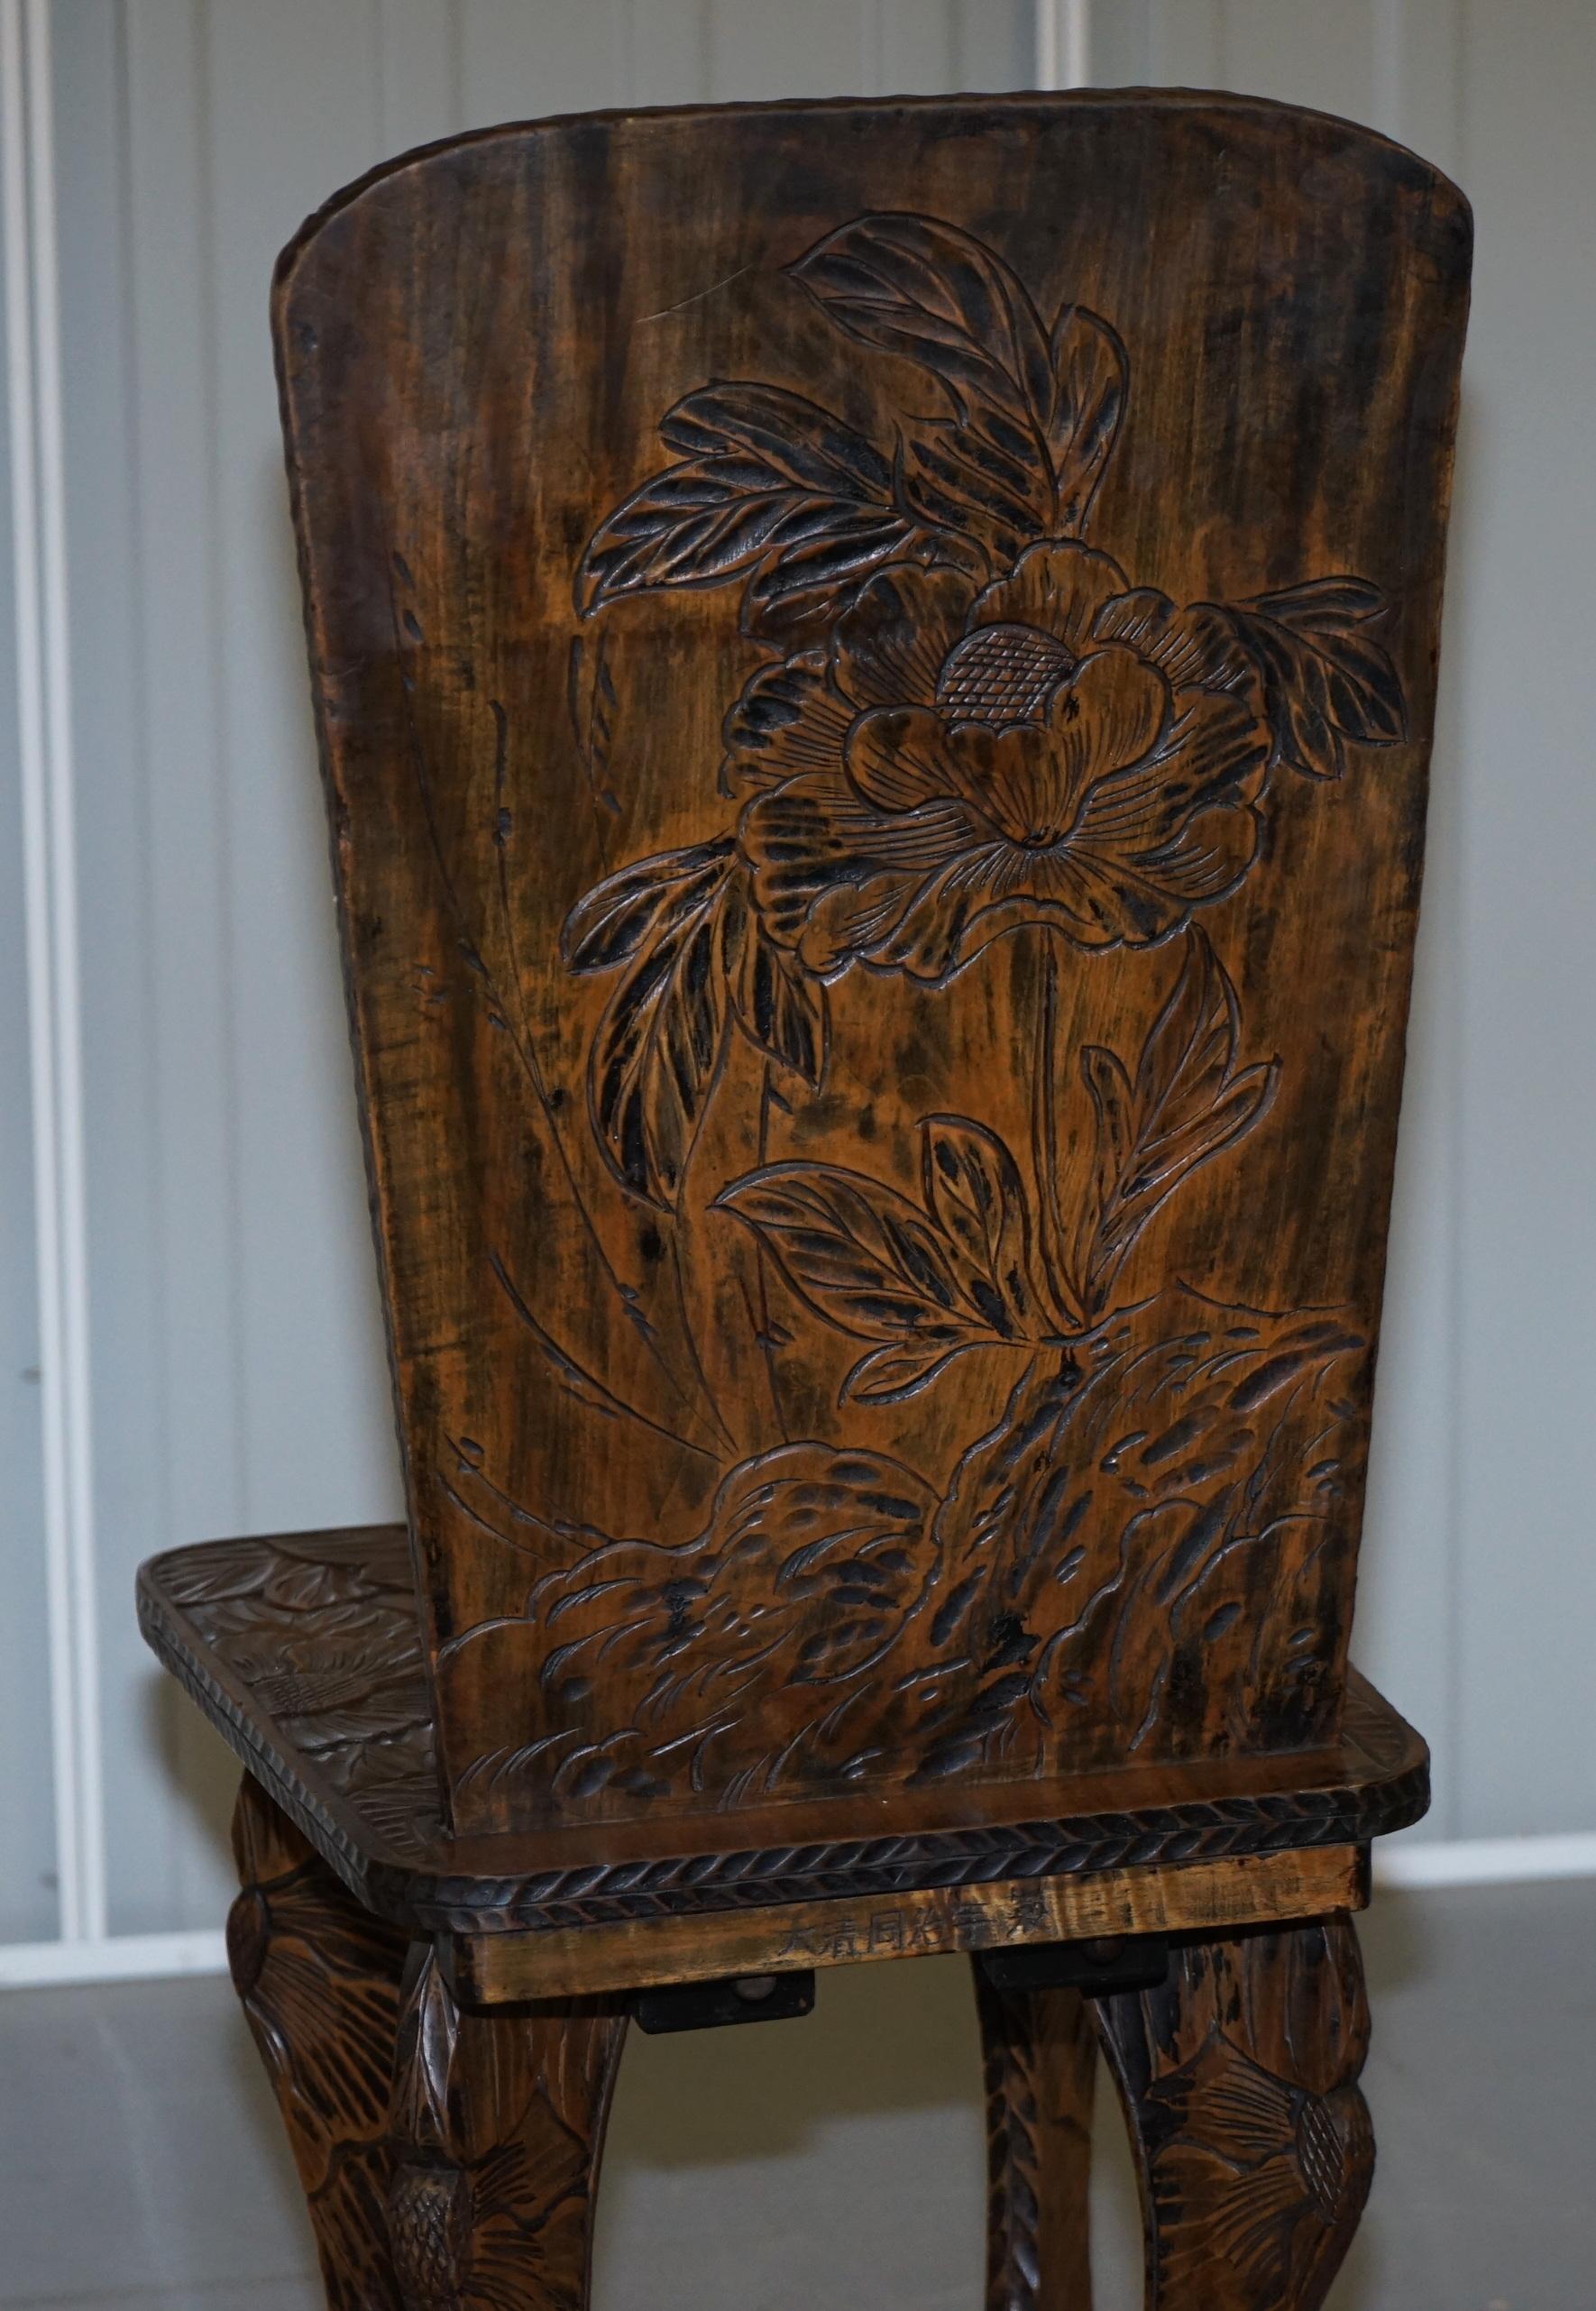 Very Rare Original Liberty's London Signed Qing Dynasty Chair Floral Carving For Sale 5